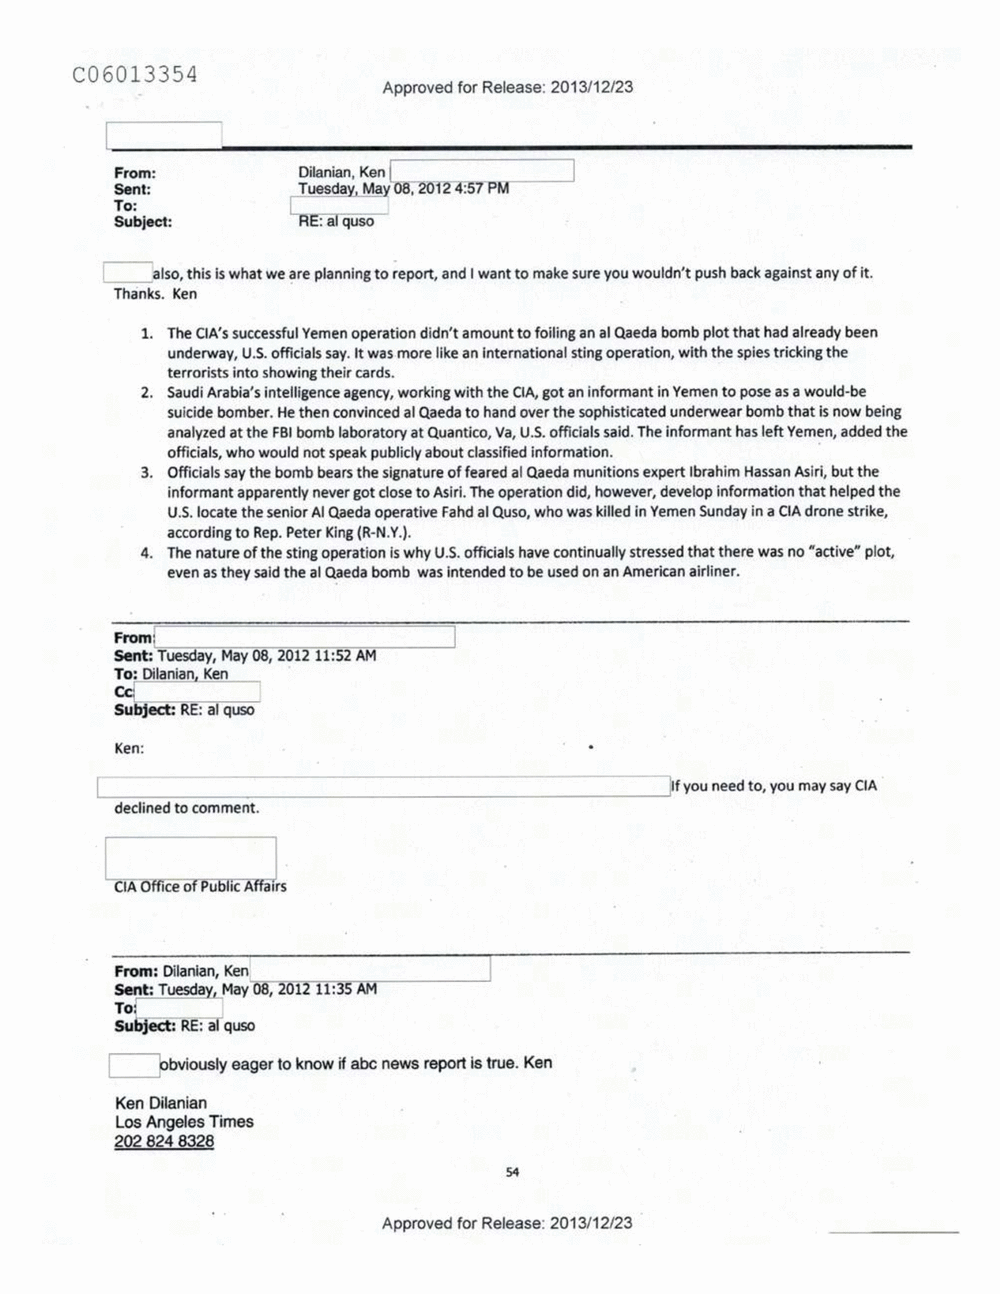 Page 272 from Email Correspondence Between Reporters and CIA Flacks